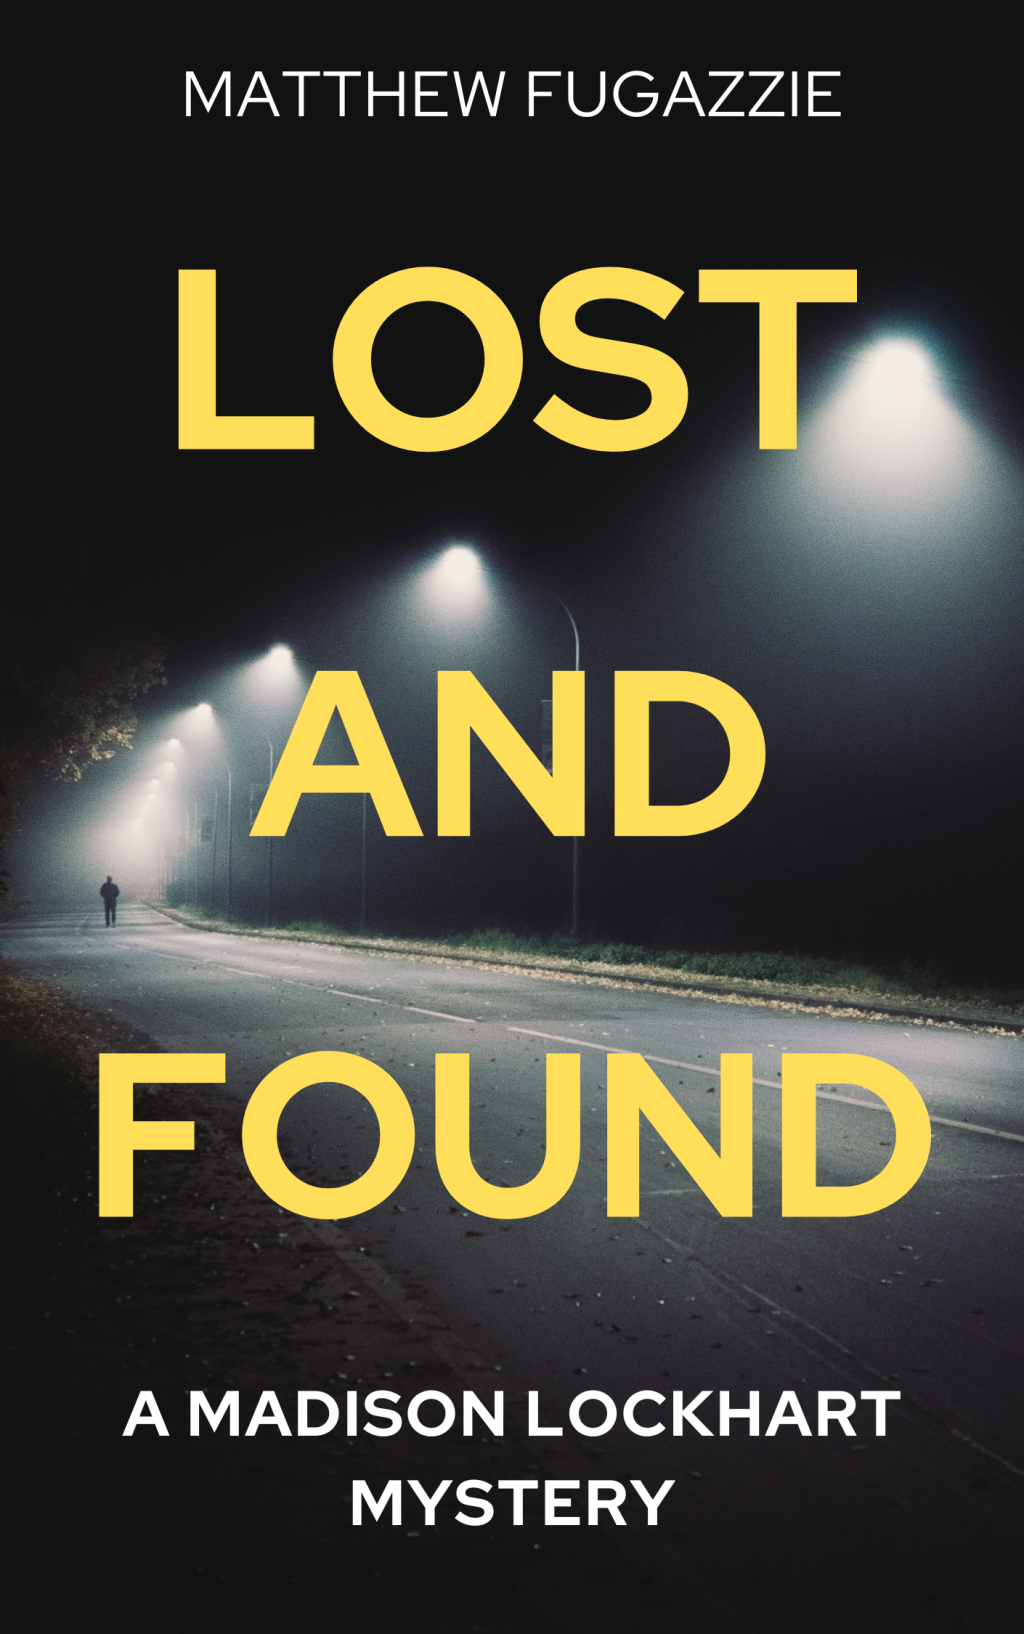 “Lost and Found: A Madison Lockhart Mystery” Is Now Available For Pre-Order!